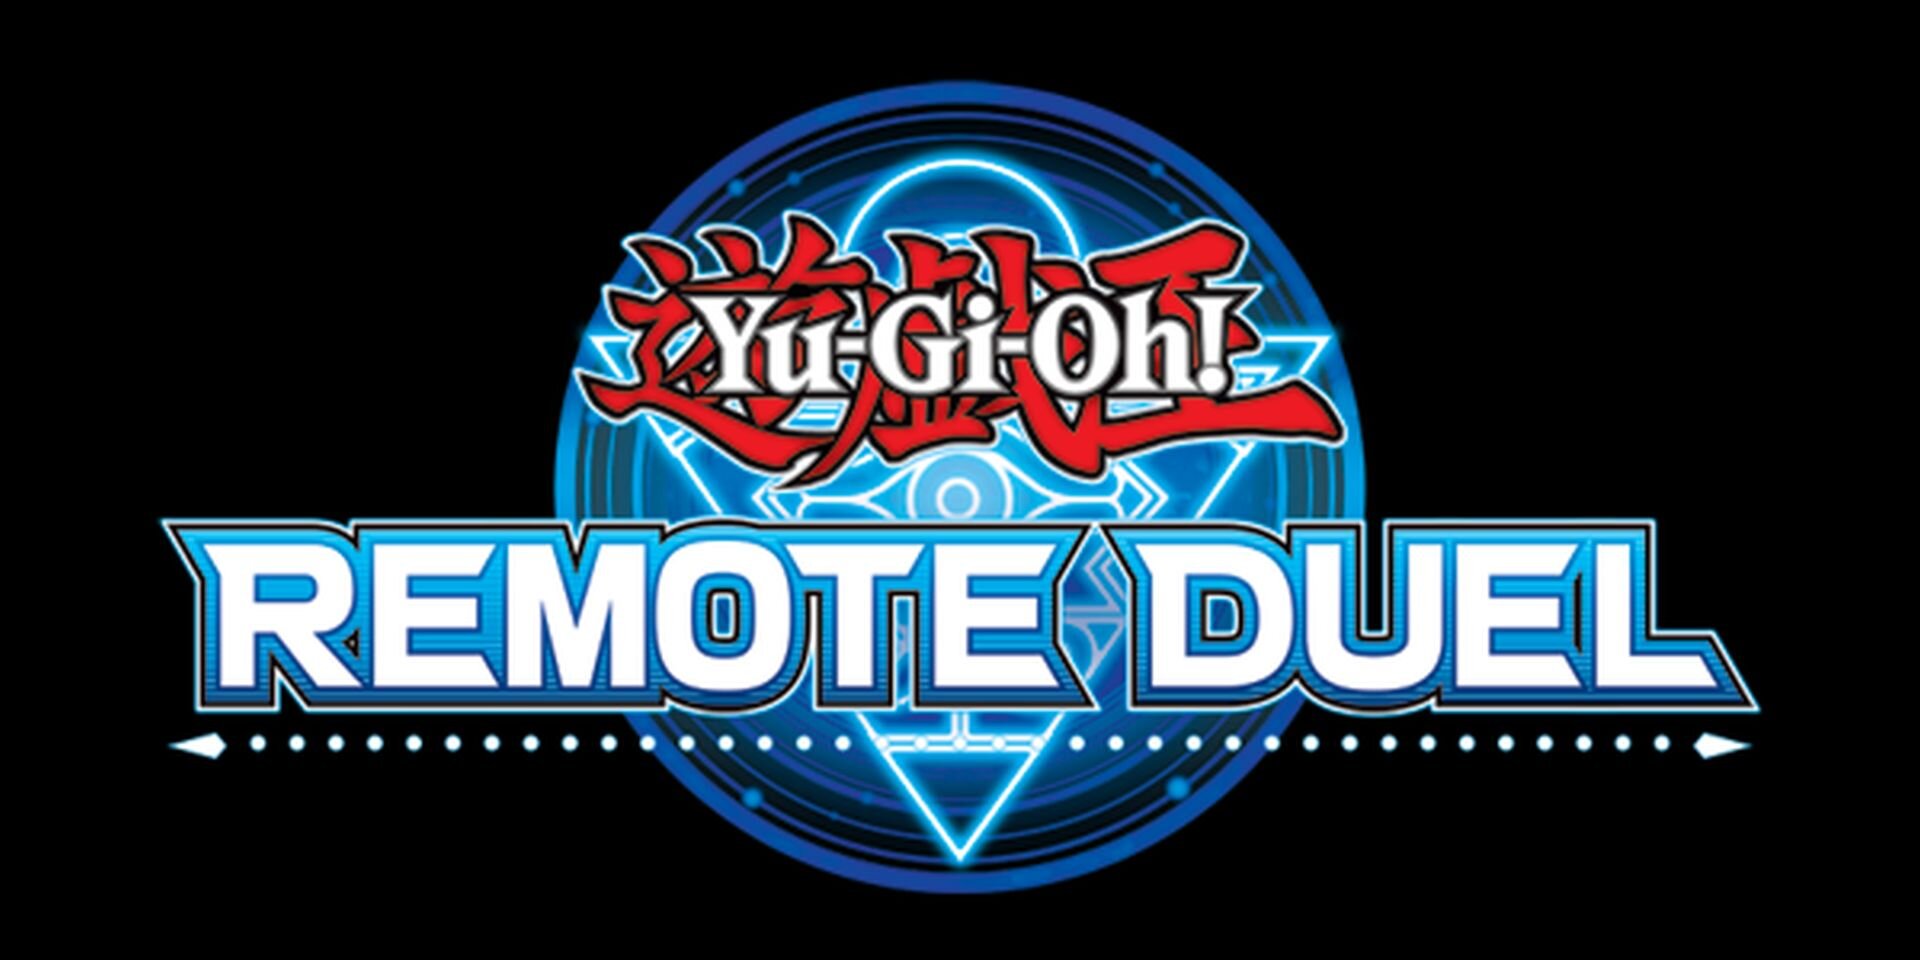 Yu-Gi-Oh Legacy of the Duelist Link Evolution – Drop The Spotlight